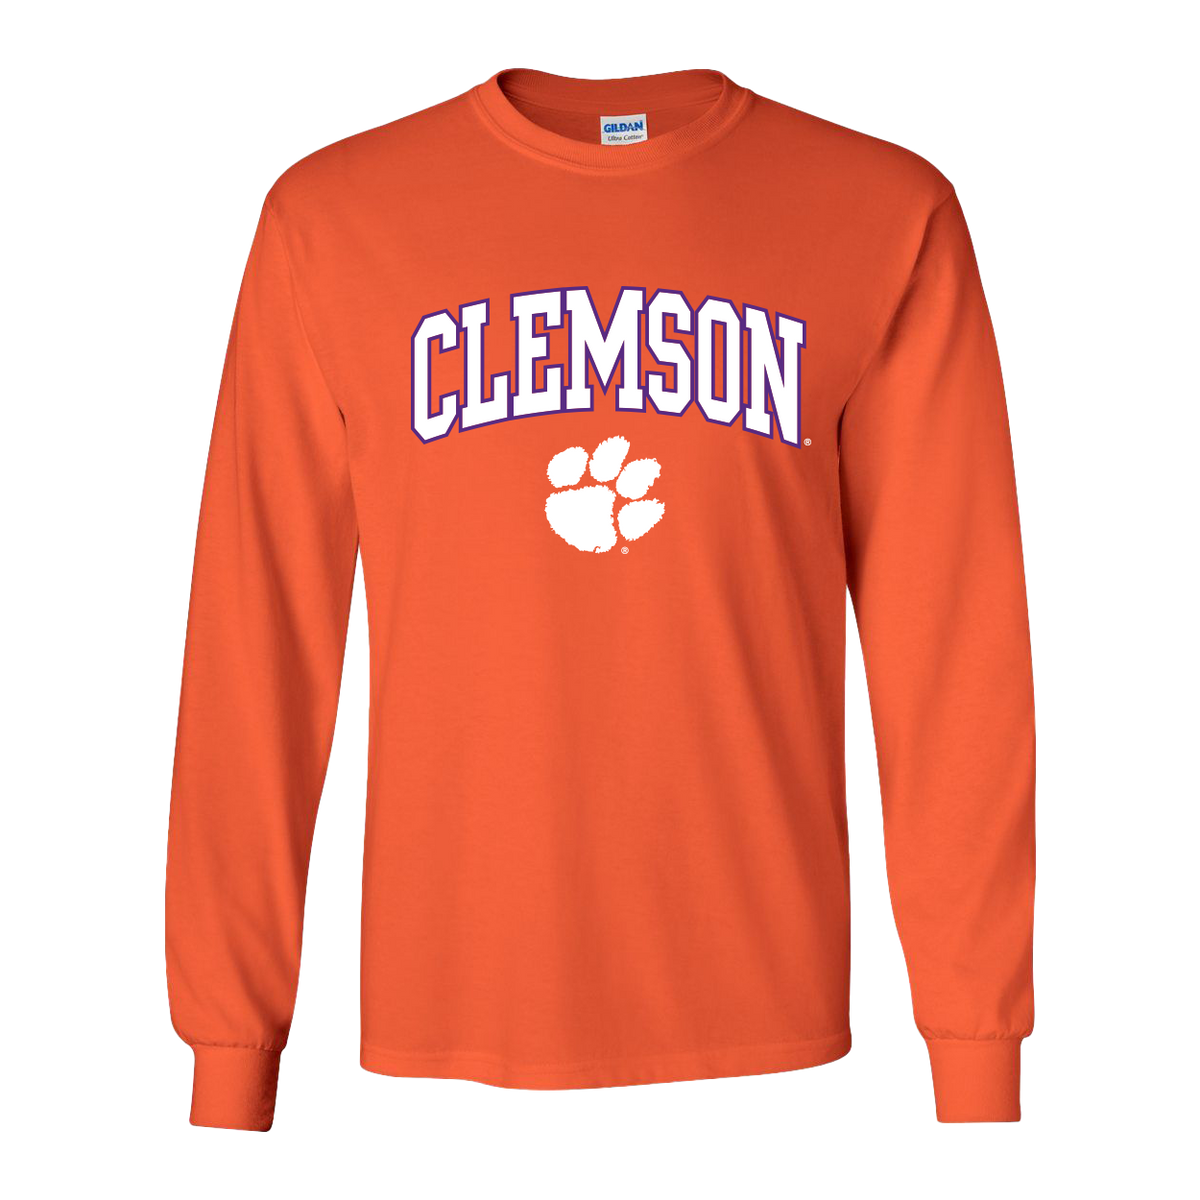 Clemson White and Purple Arch and Paw Long Sleeve Tee - Orange